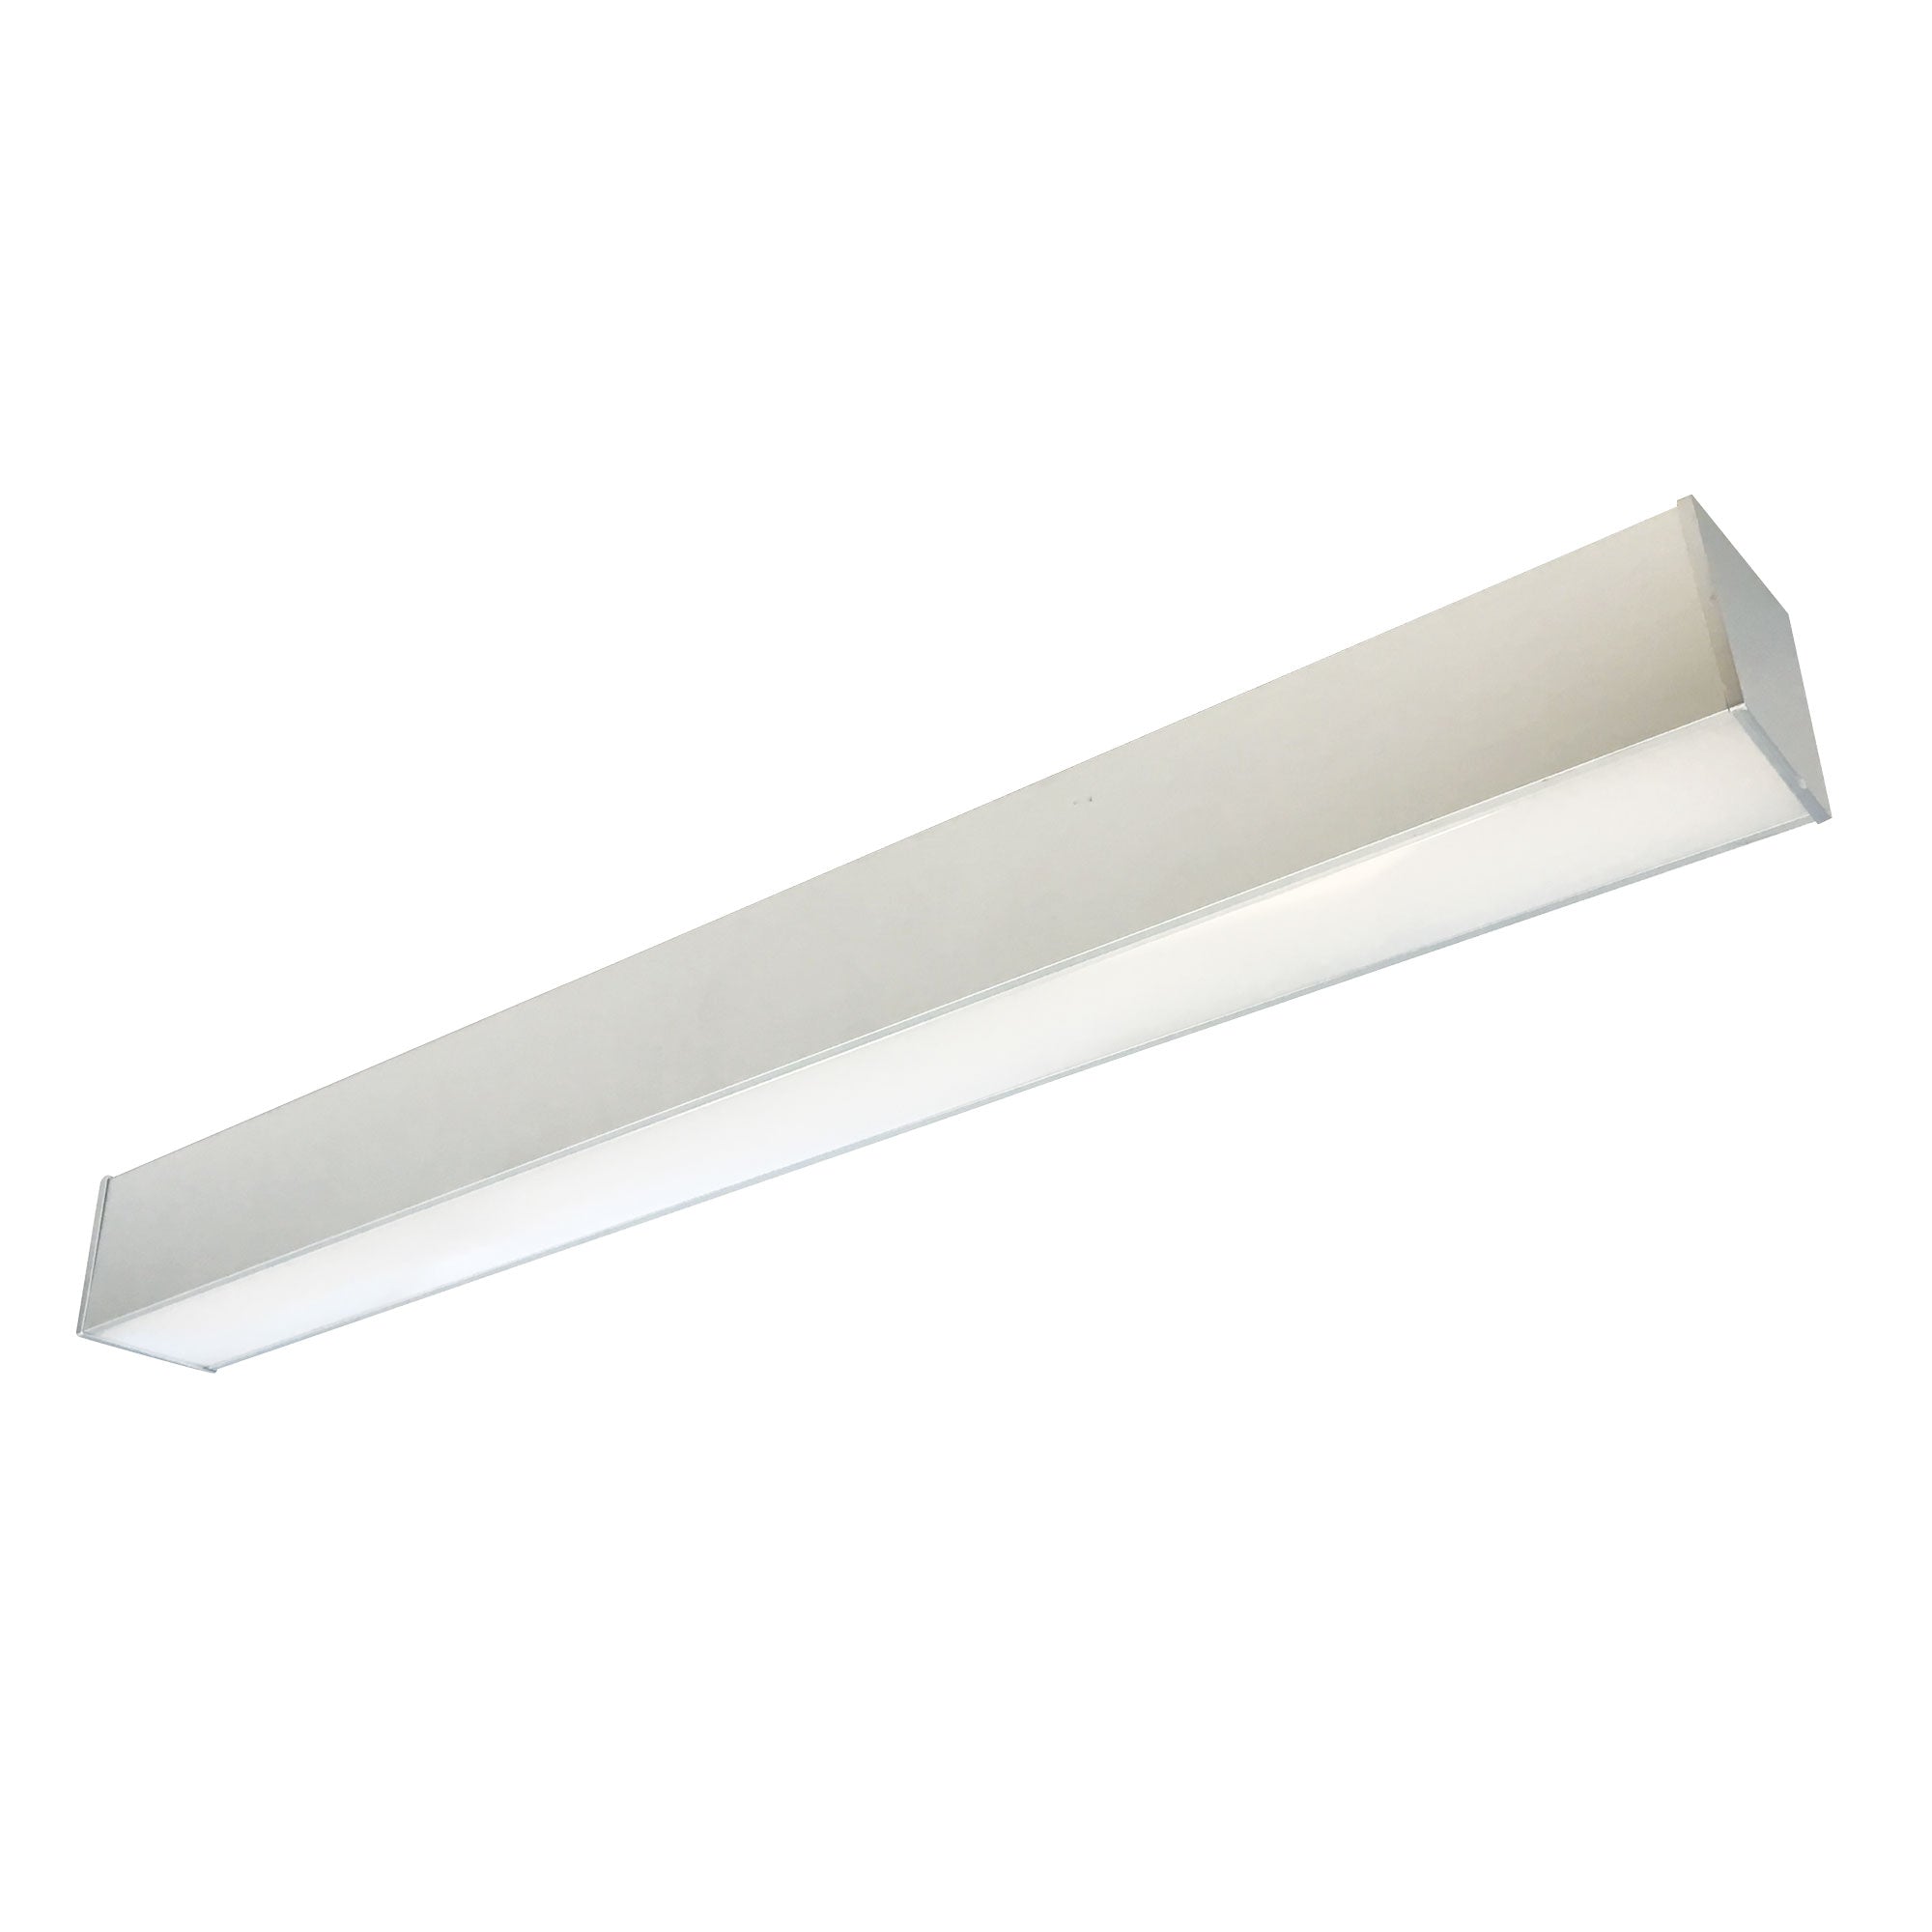 Nora Lighting NLIN-21030A - Linear - 2' L-Line LED Direct Linear w/ Dedicated CCT, 2100lm / 3000K, Aluminum Finish